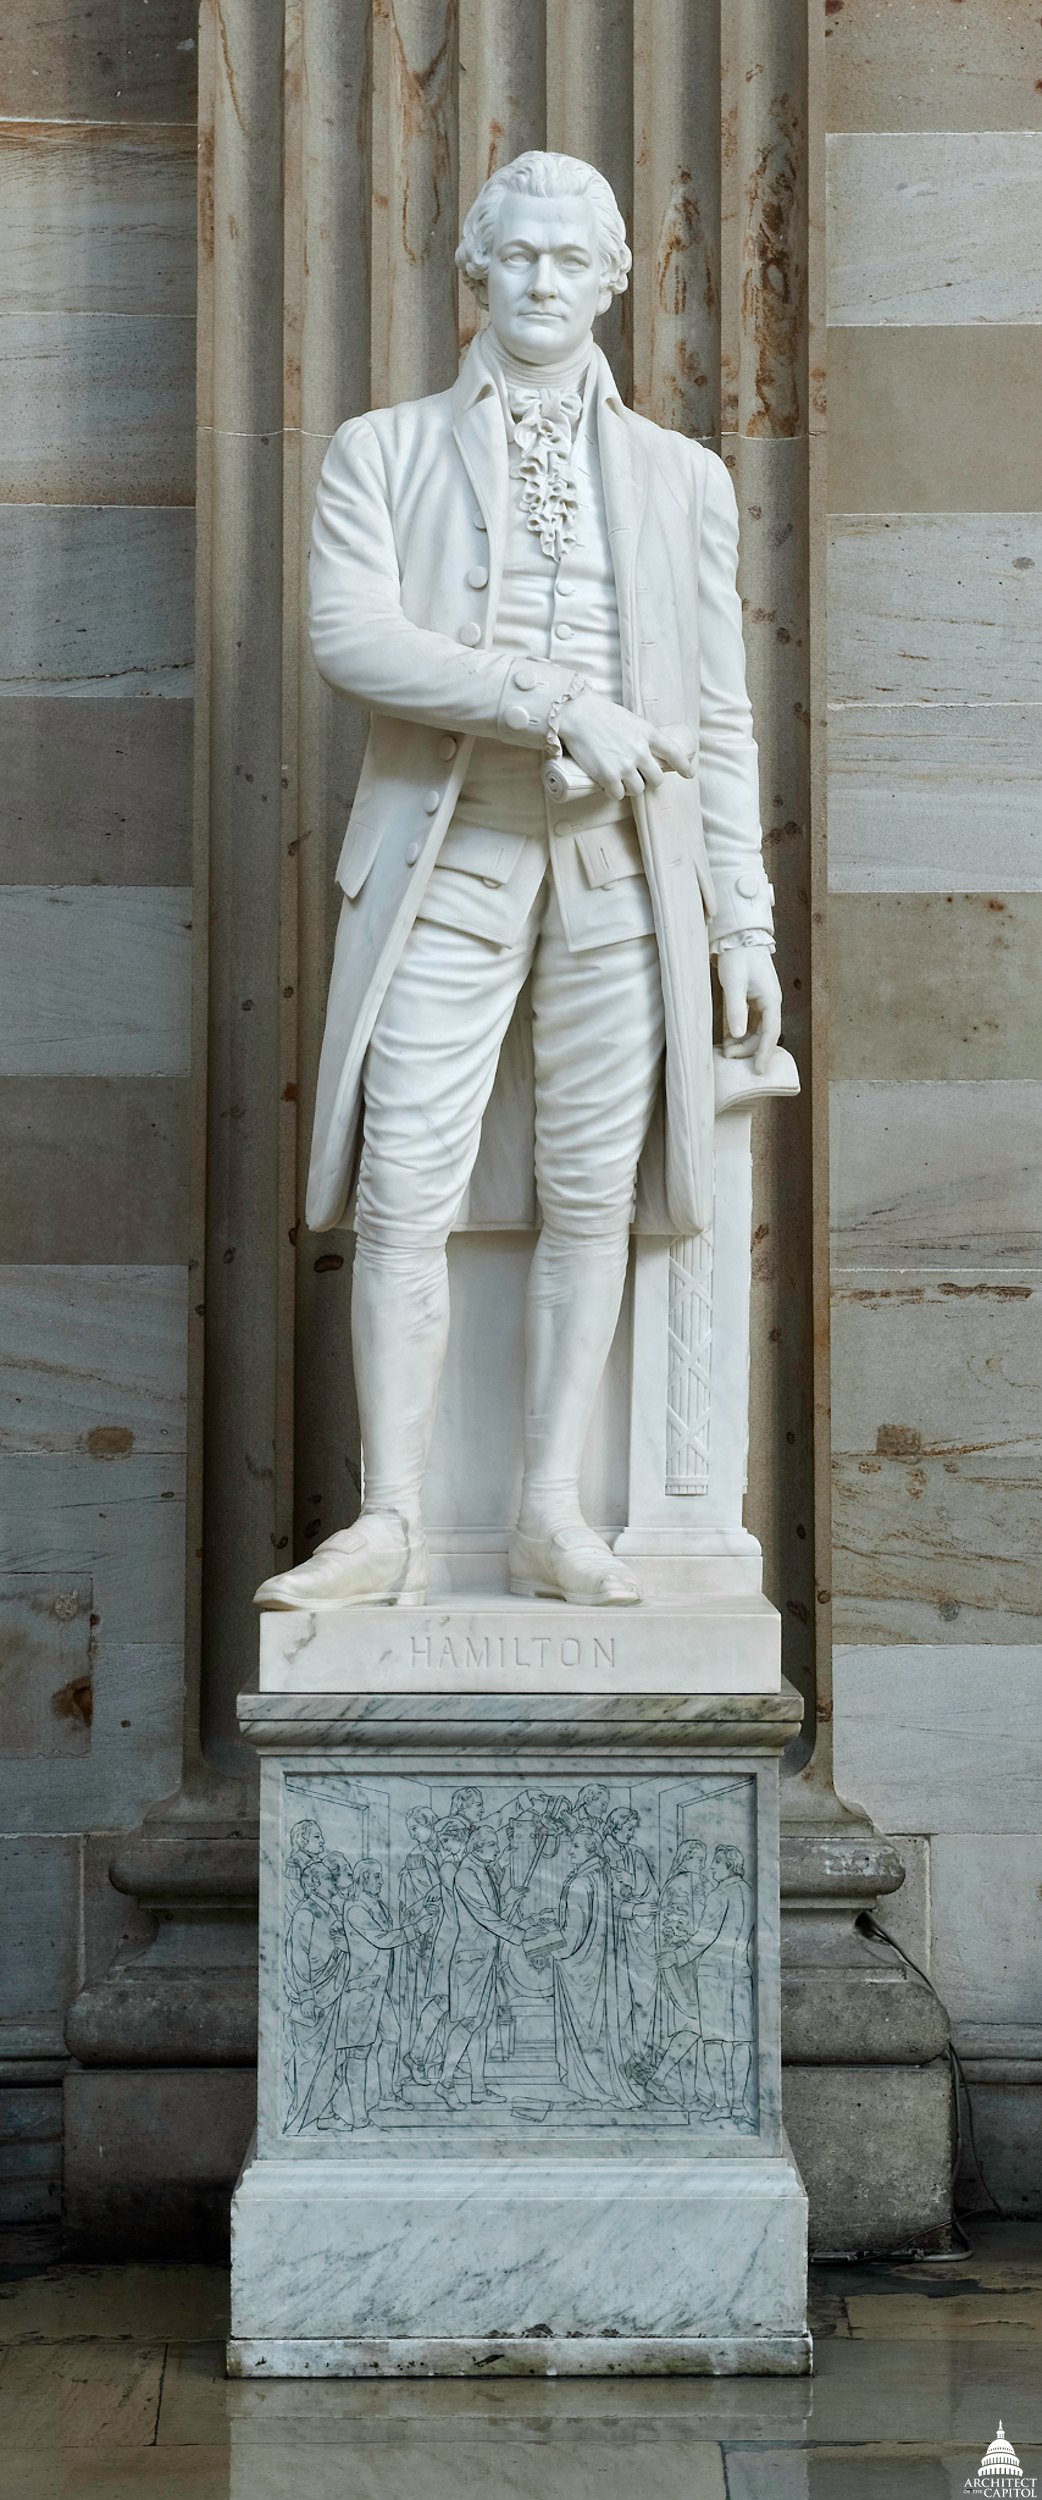 The statue of Alexander Hamilton on display in the Rotunda of the U.S. Capitol emphasizes his role in the framing of the new nation's government.